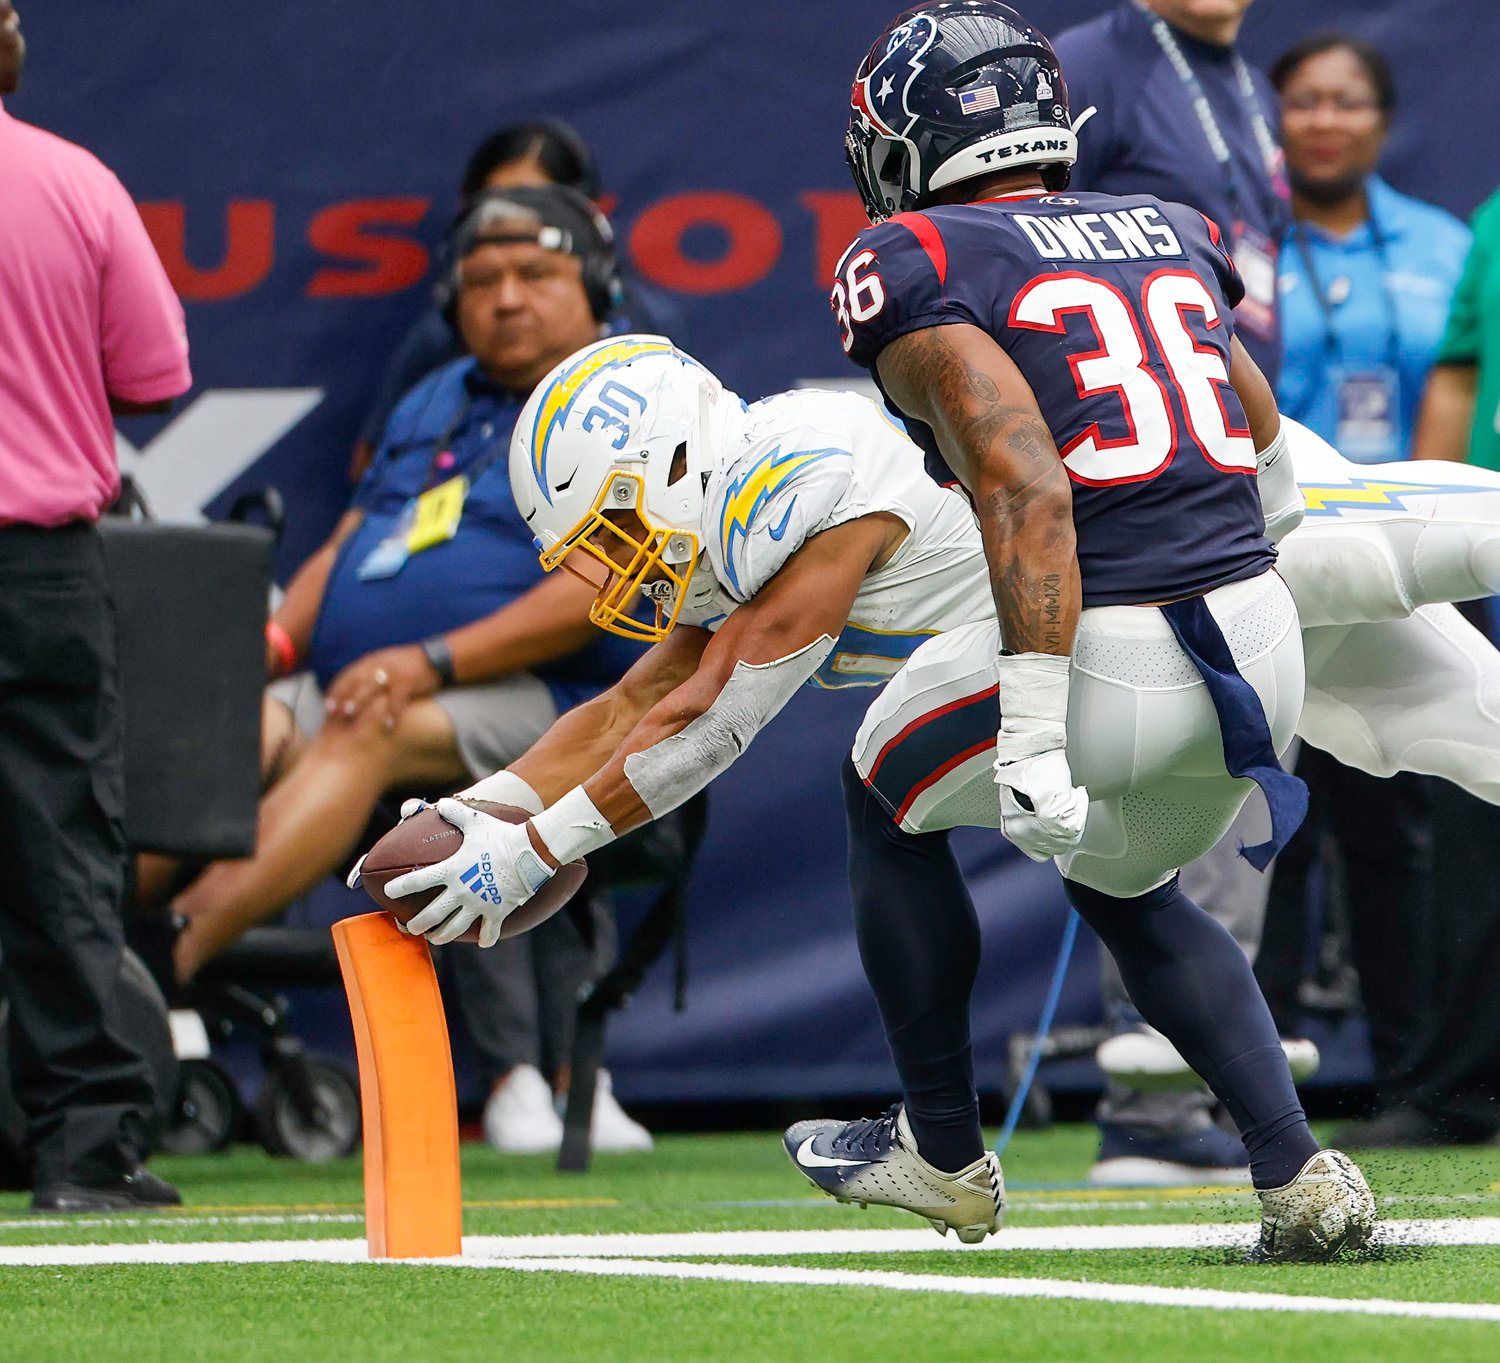 Chargers running back Austin Ekeler (30) dives to the pylon to score on a 14-yard touchdown reception during an NFL game between the Texans and the Chargers on Oct. 2, 2022 in Houston. The Chargers won 34-24.